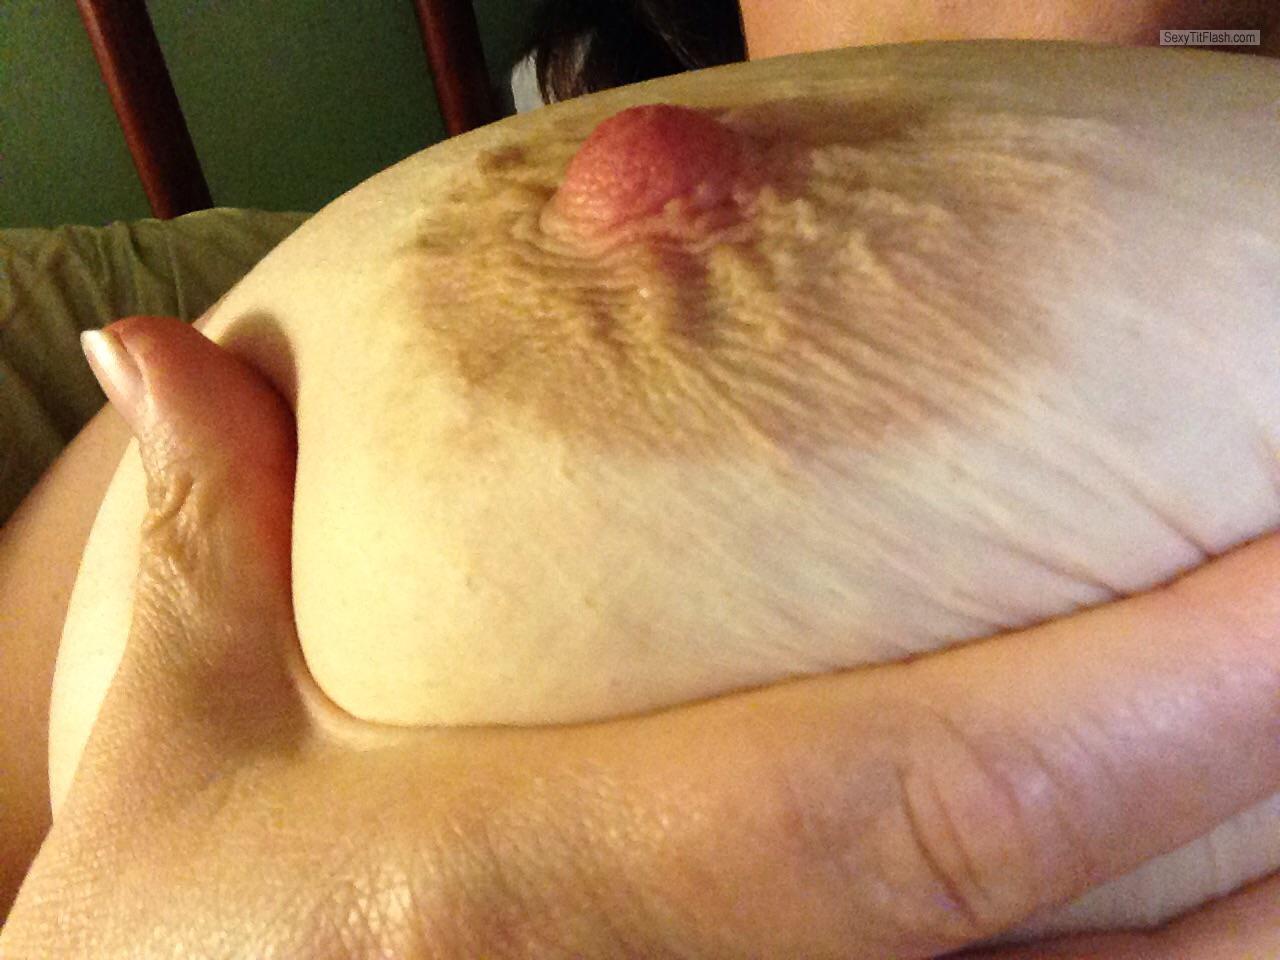 Tit Flash: My Extremely Big Tits (Selfie) - Titty Titty Bang Bang from United Kingdom